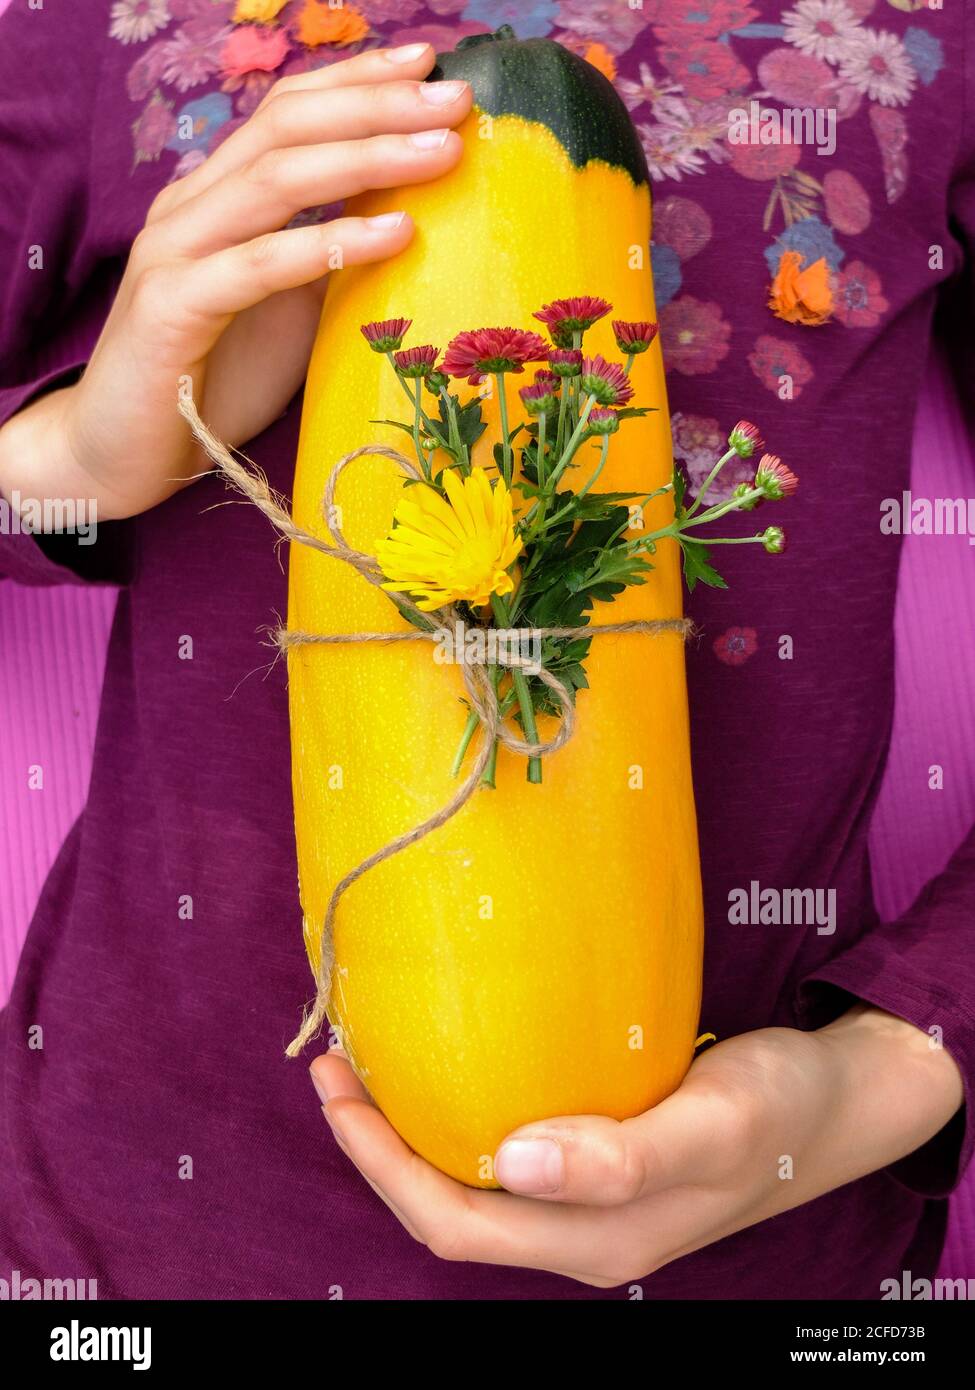 Two-tone yellow-green zucchini 'Zephyr', decorative with flowers Stock Photo